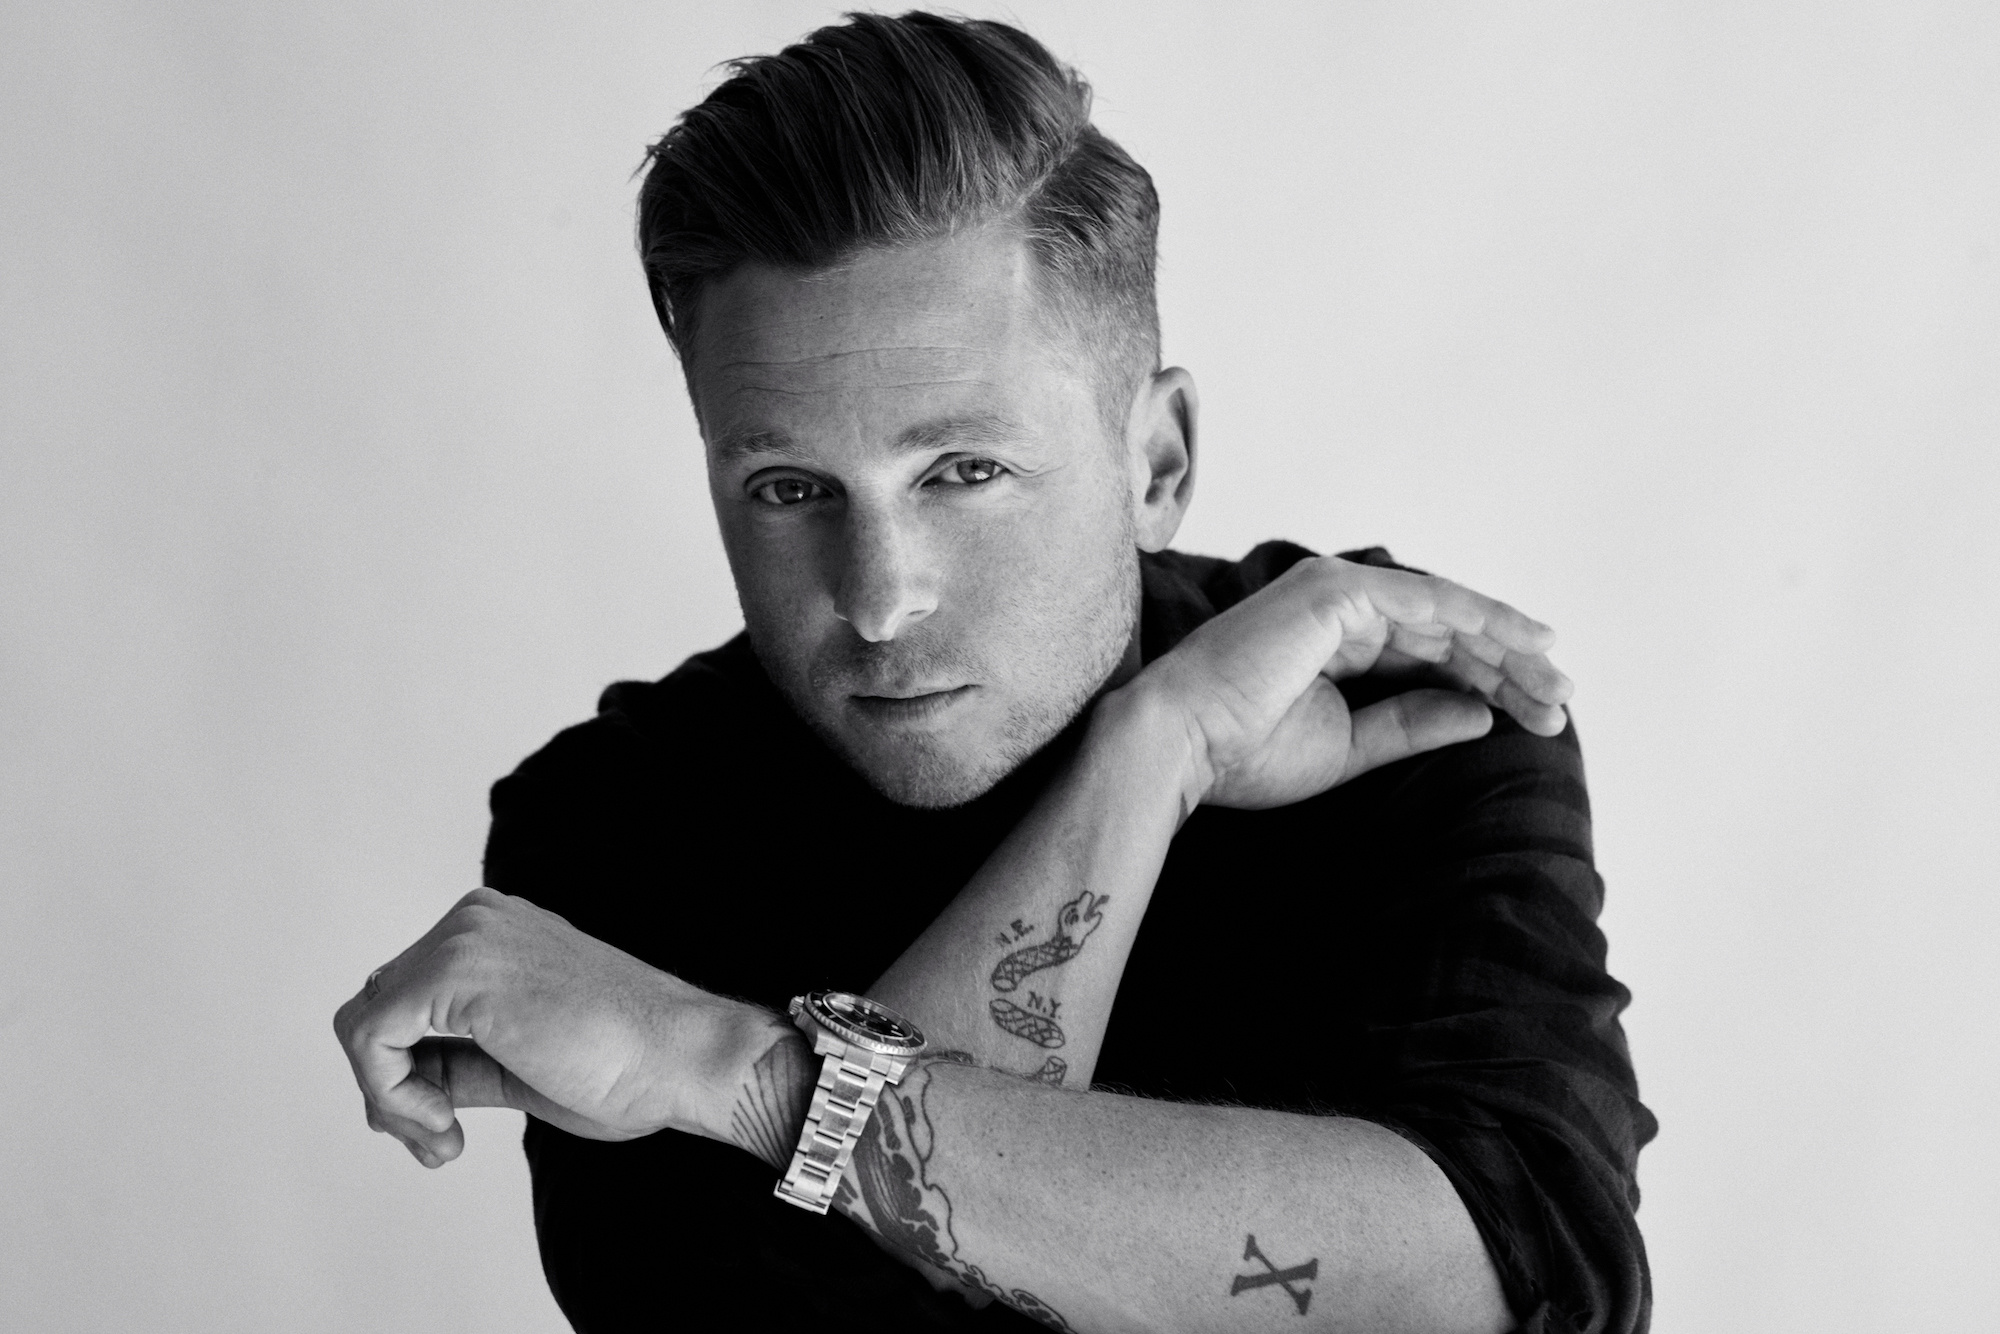 OneRepublic: Ryan Tedder, A songwriter and producer for various artists since the mid-2000s, Monochrome. 2000x1340 HD Wallpaper.